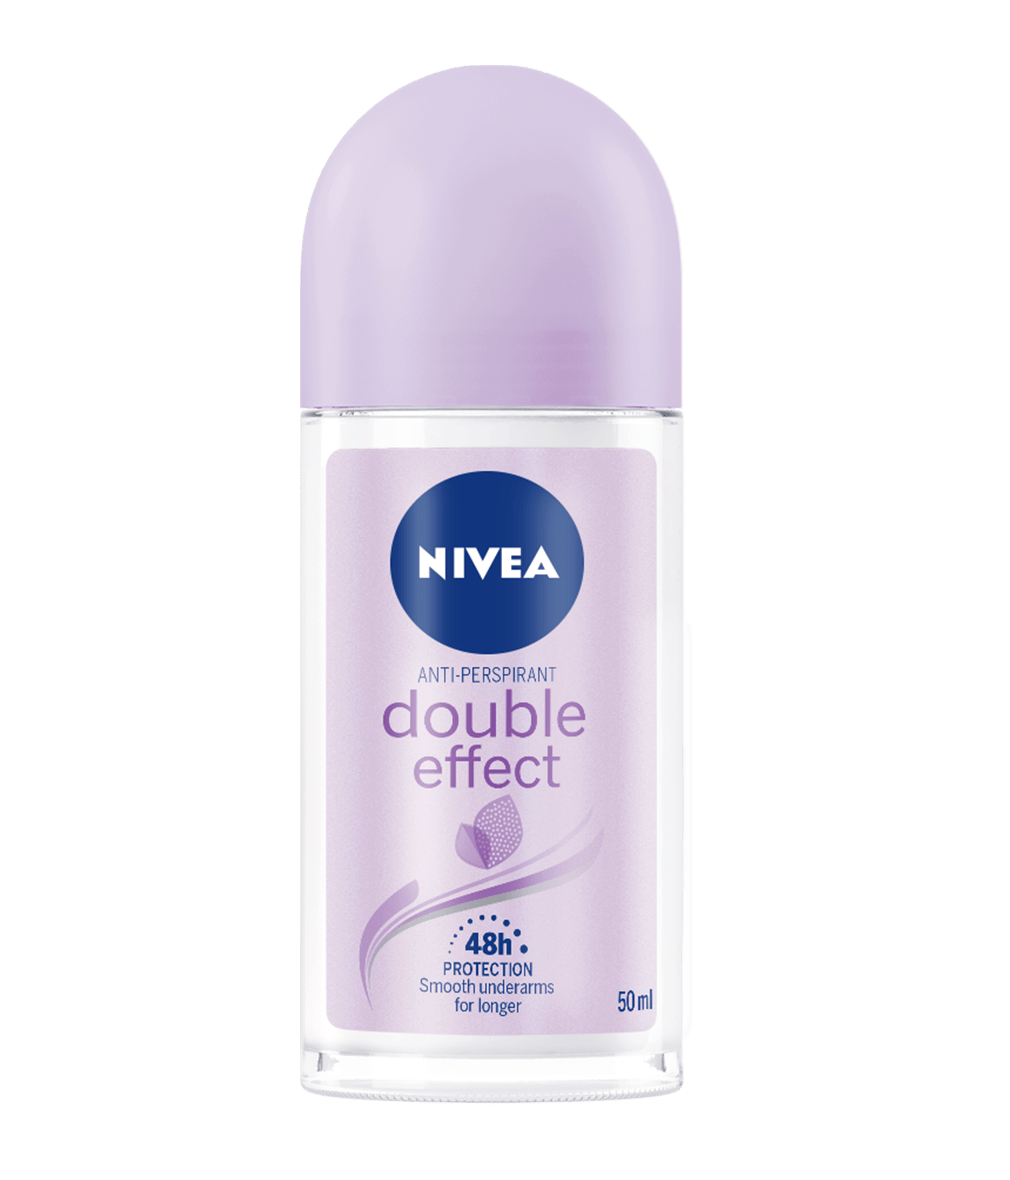 NIVEA DEO DOUBLE EFFECT ON